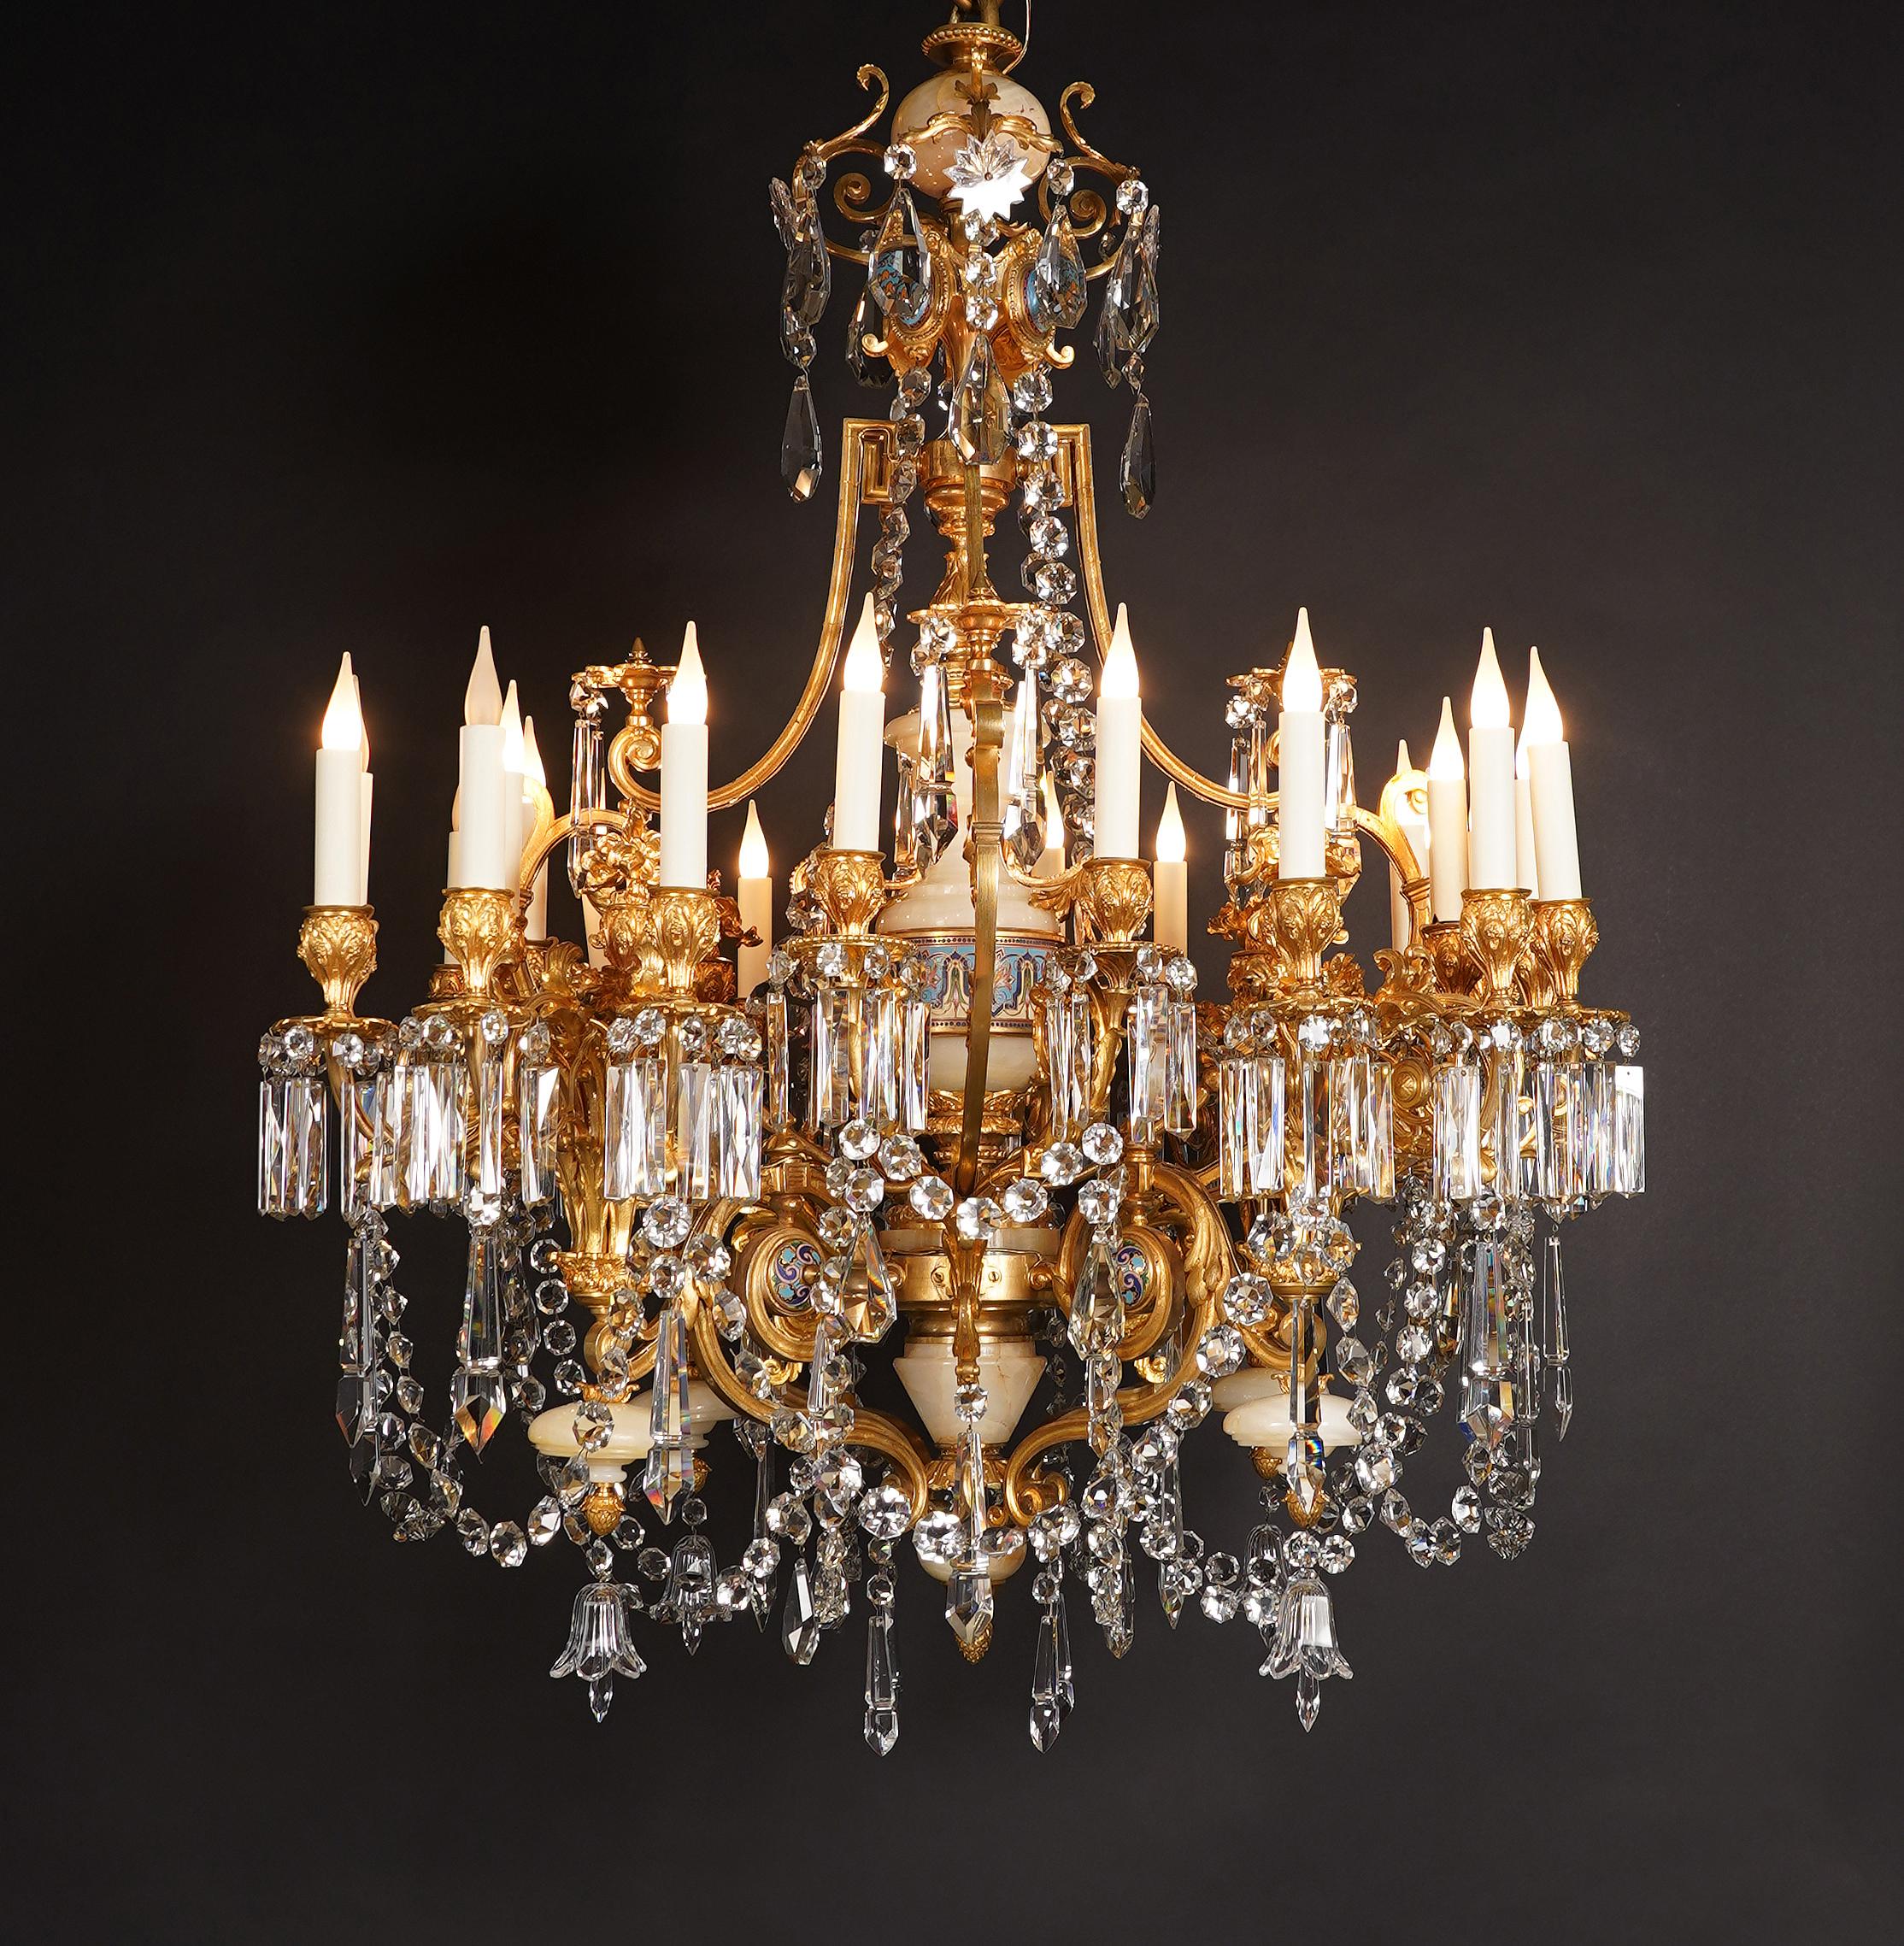 Rare and important orientalist chandelier with 24 lights, in Algerian onyx, chiseled and gilded bronze and cloisonné enamel. It consists of a shaft formed by a baluster-shaped vase in onyx decorated with a rotating frieze in polychrome cloisonné